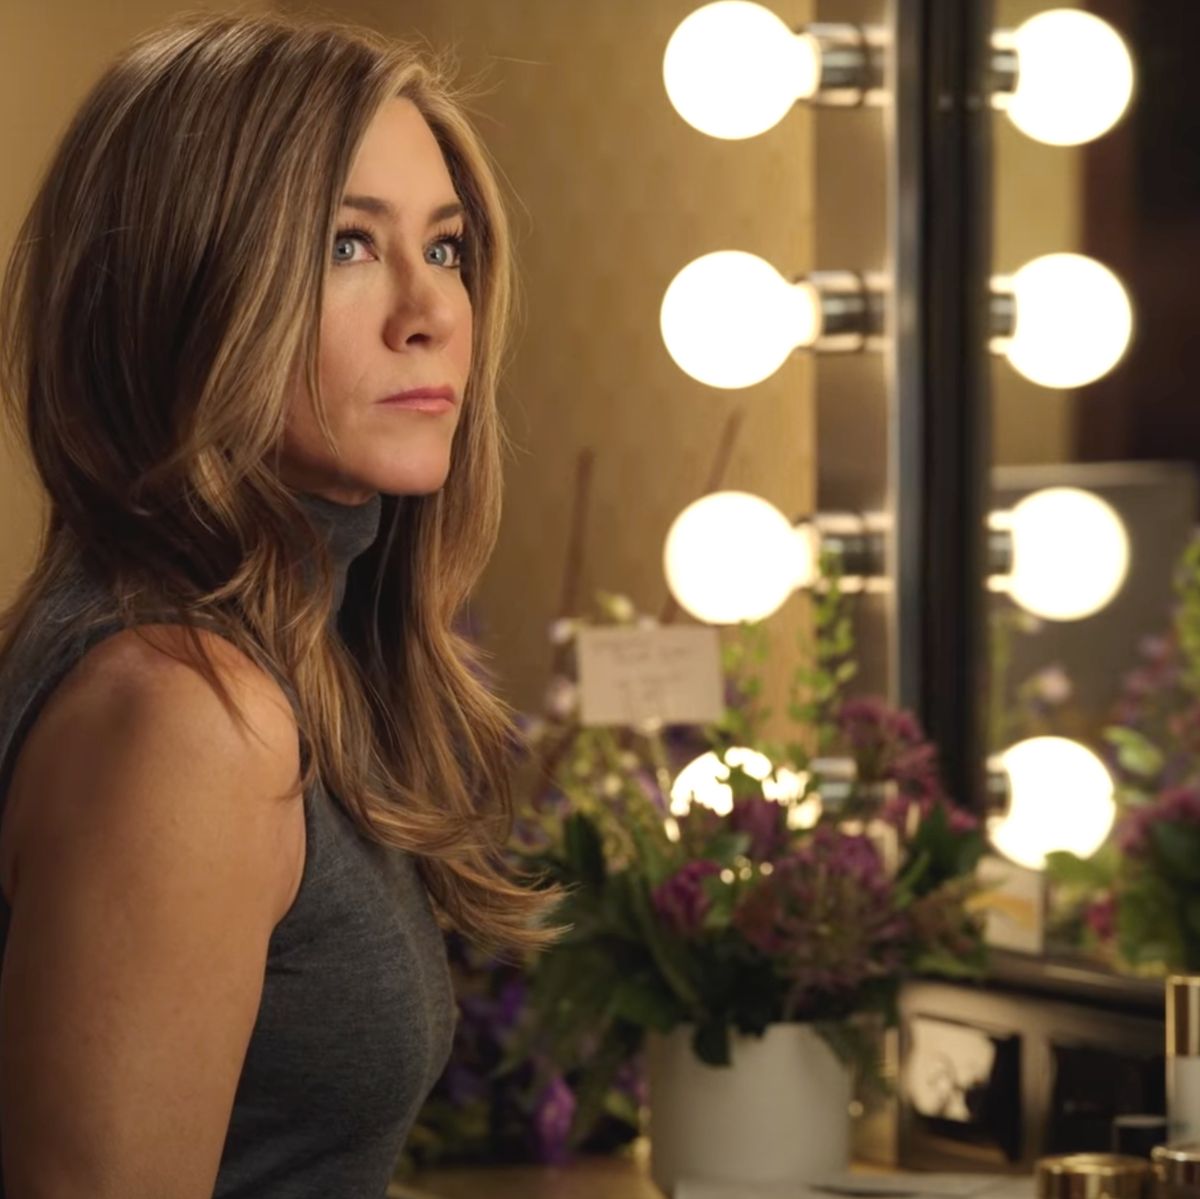 We need to talk about Jennifer Aniston's misguided take on cancel